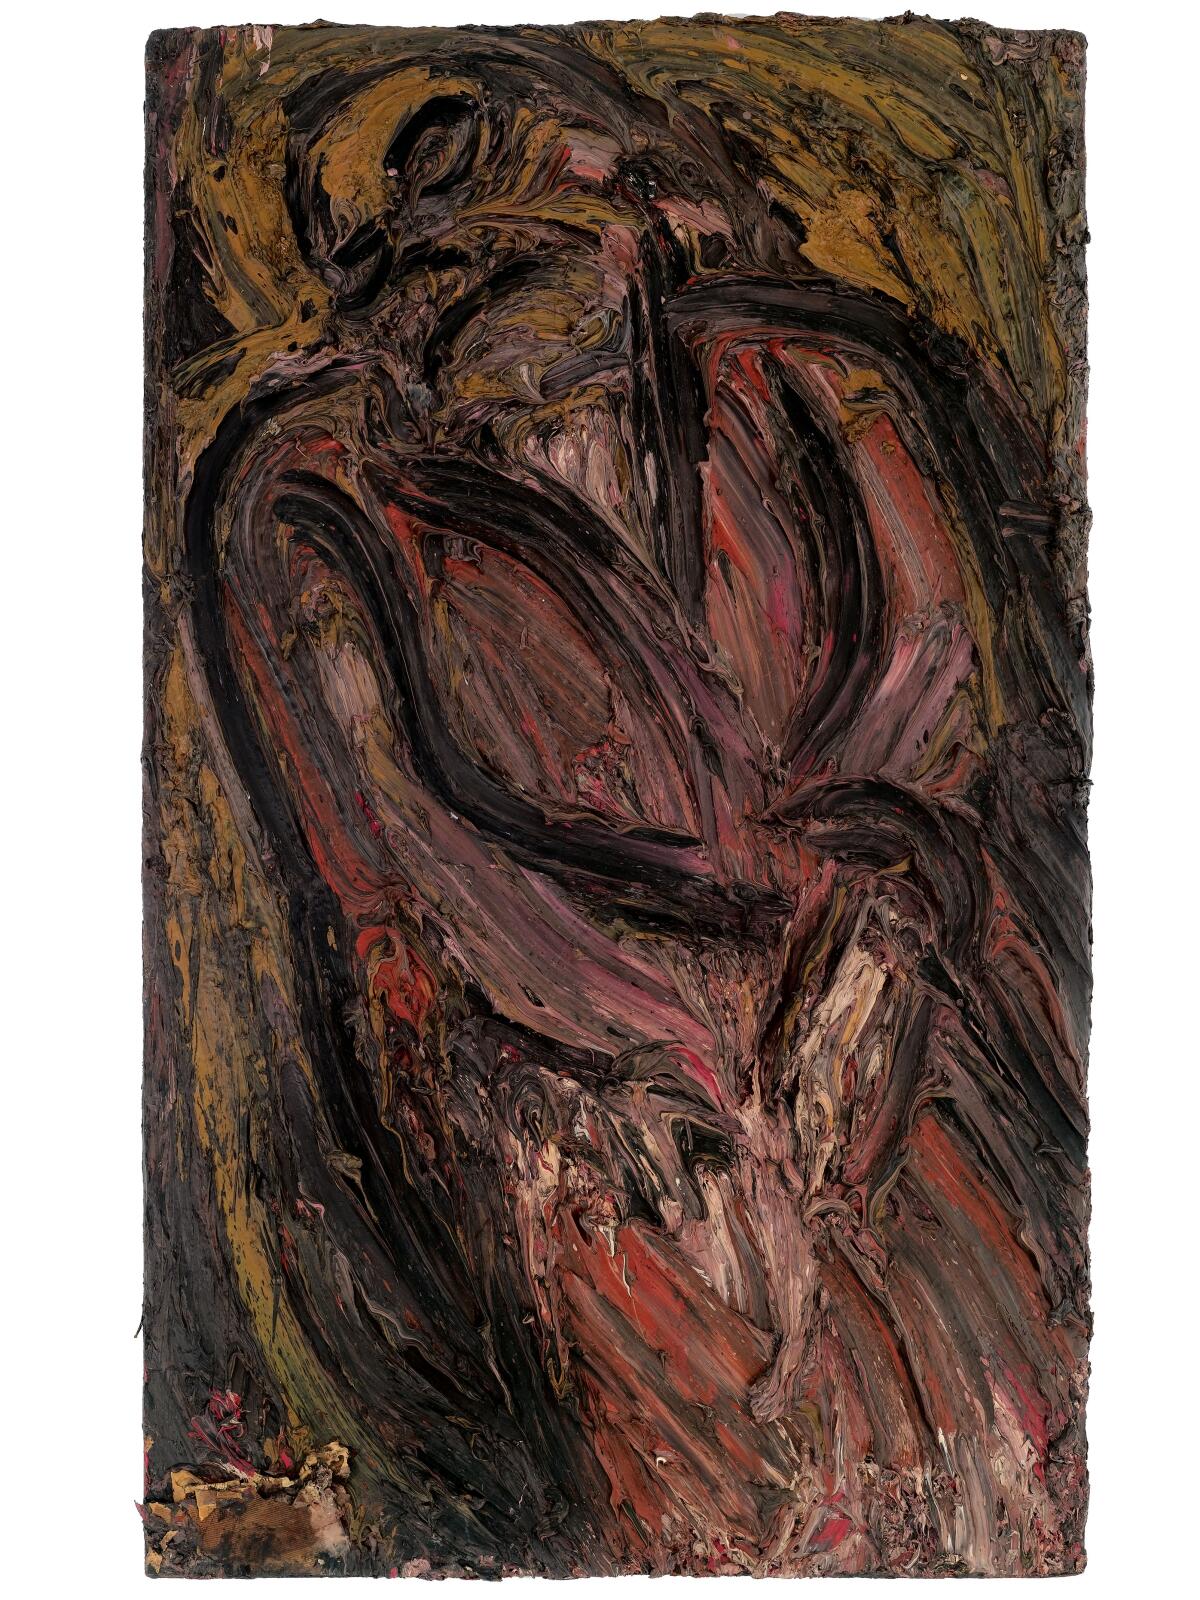 A painting of a human figure depicted with thick, multicolored strokes.